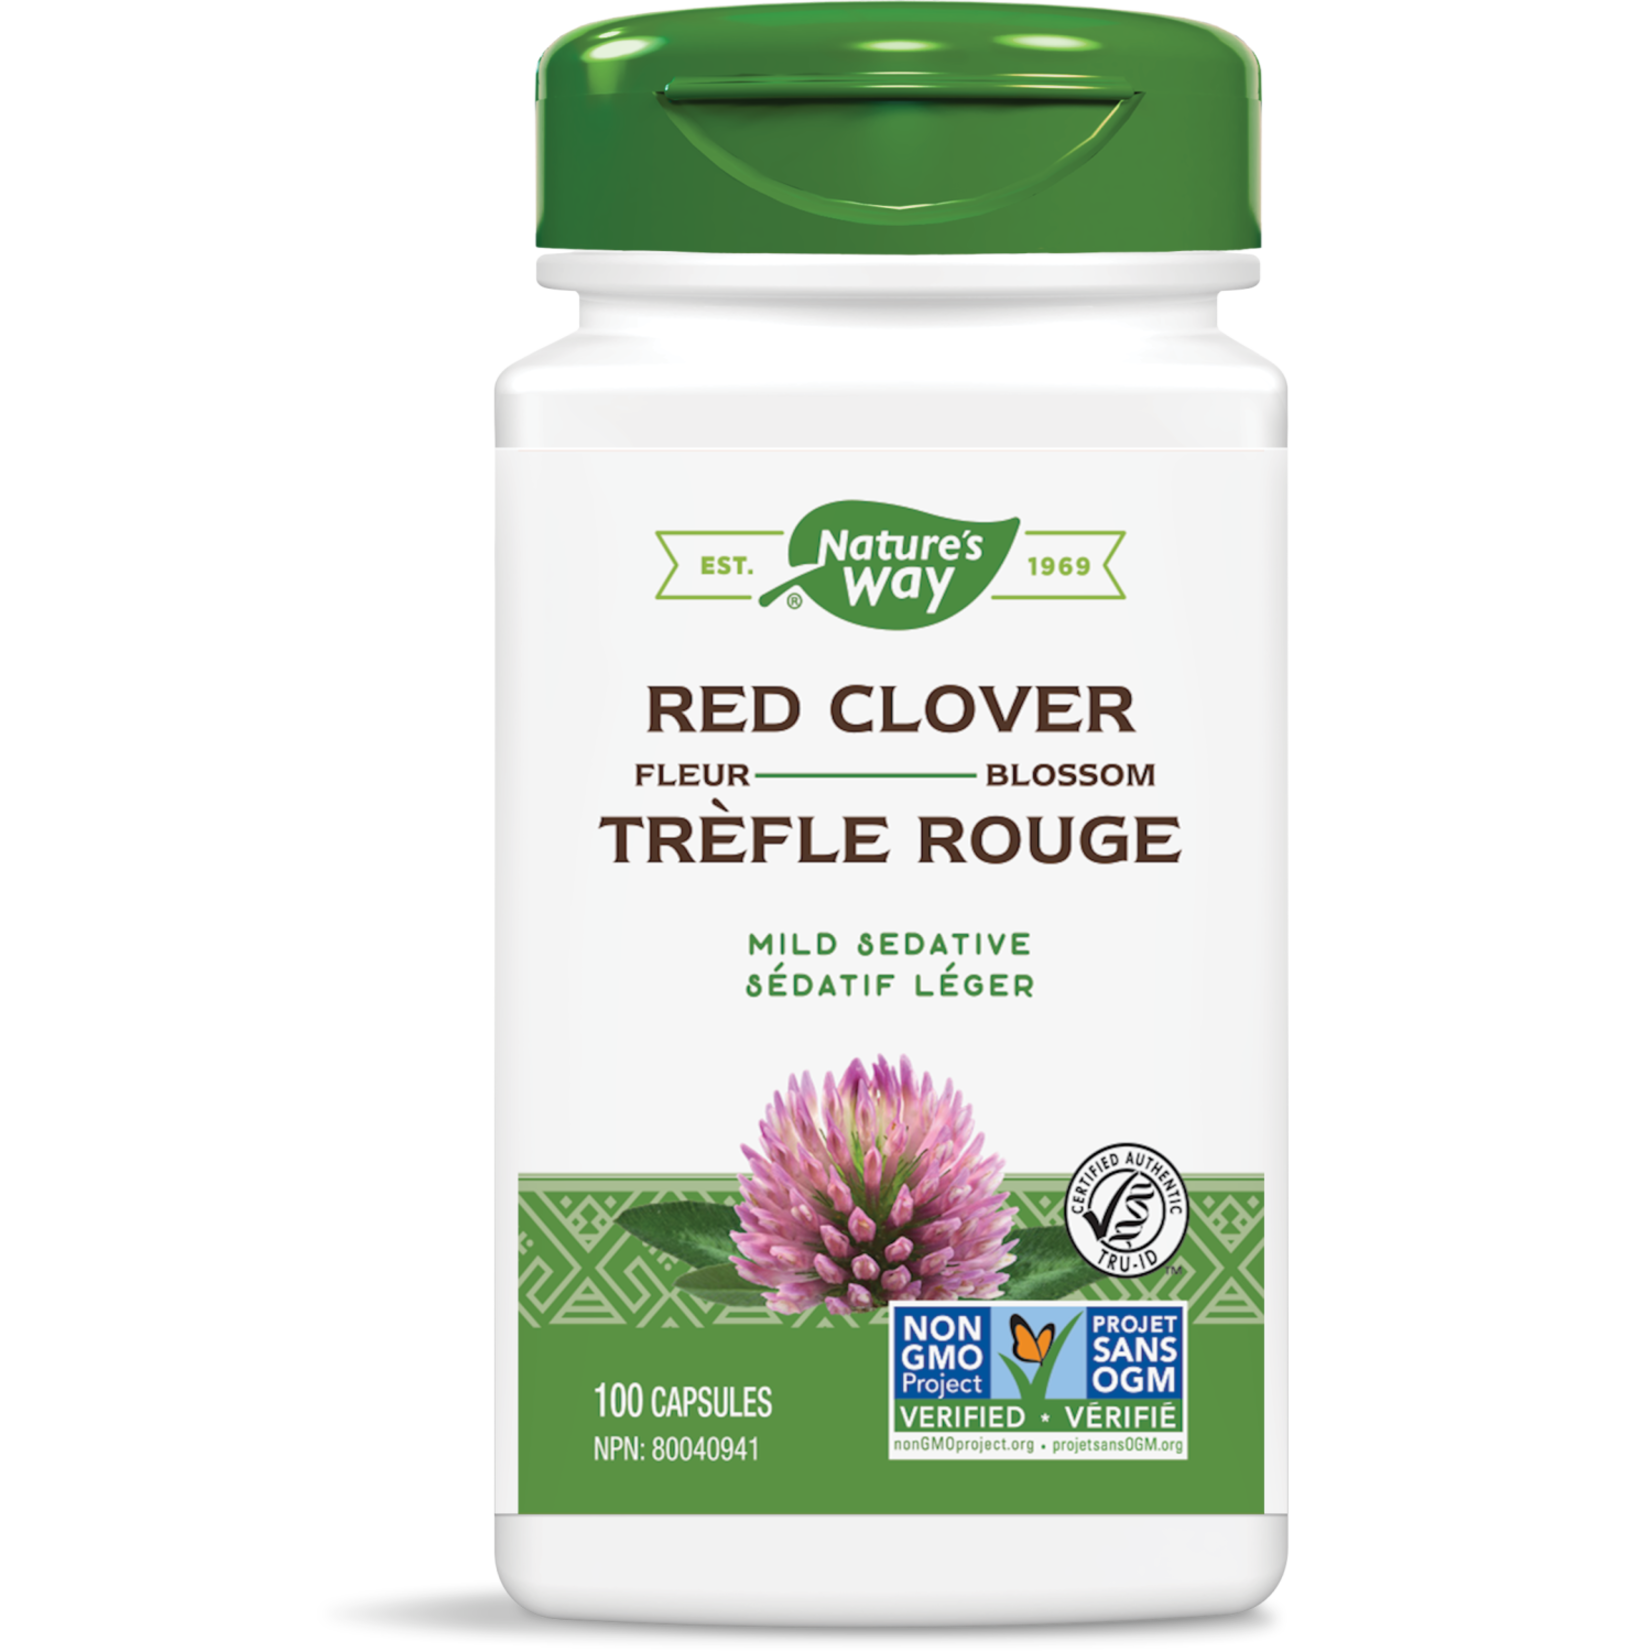 NATURES WAY NATURE'S WAY RED CLOVER BLOSSOMS 100 CAPS